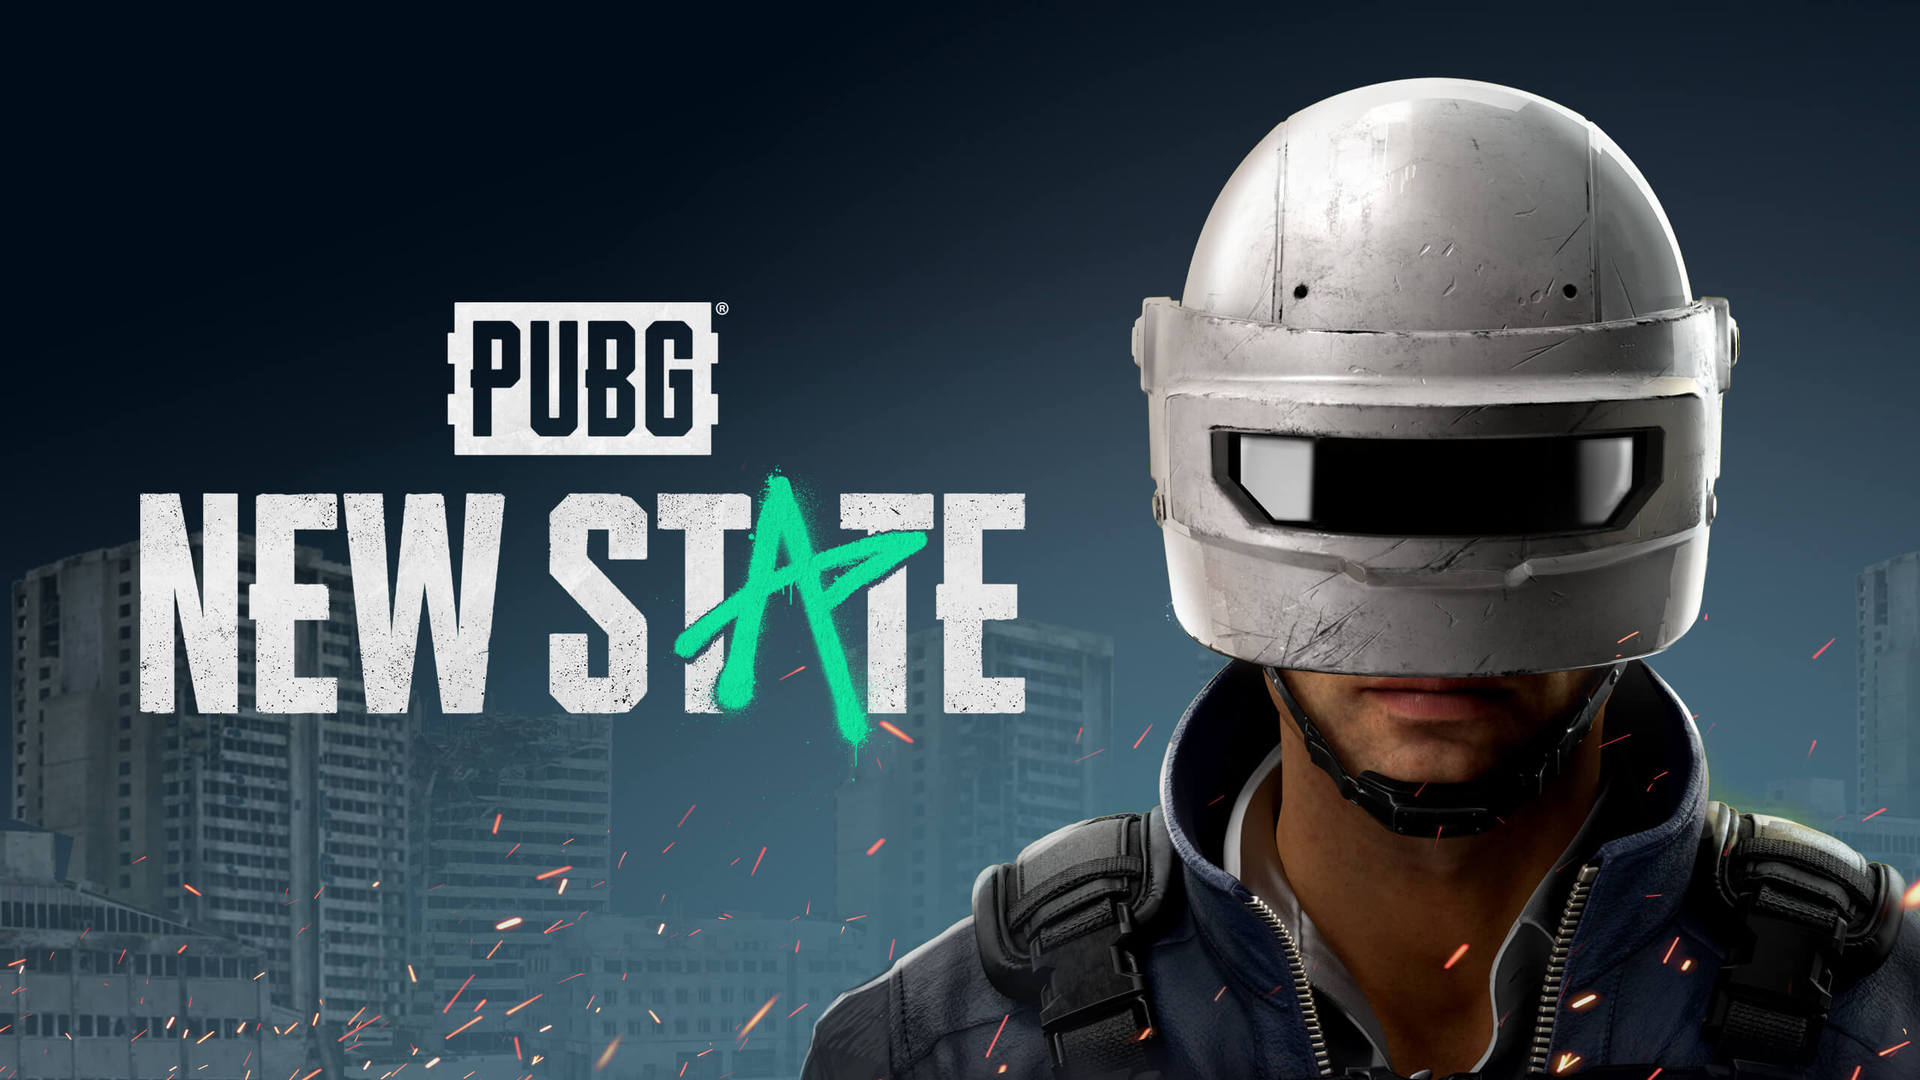 PUBG New State Official PR Image 1